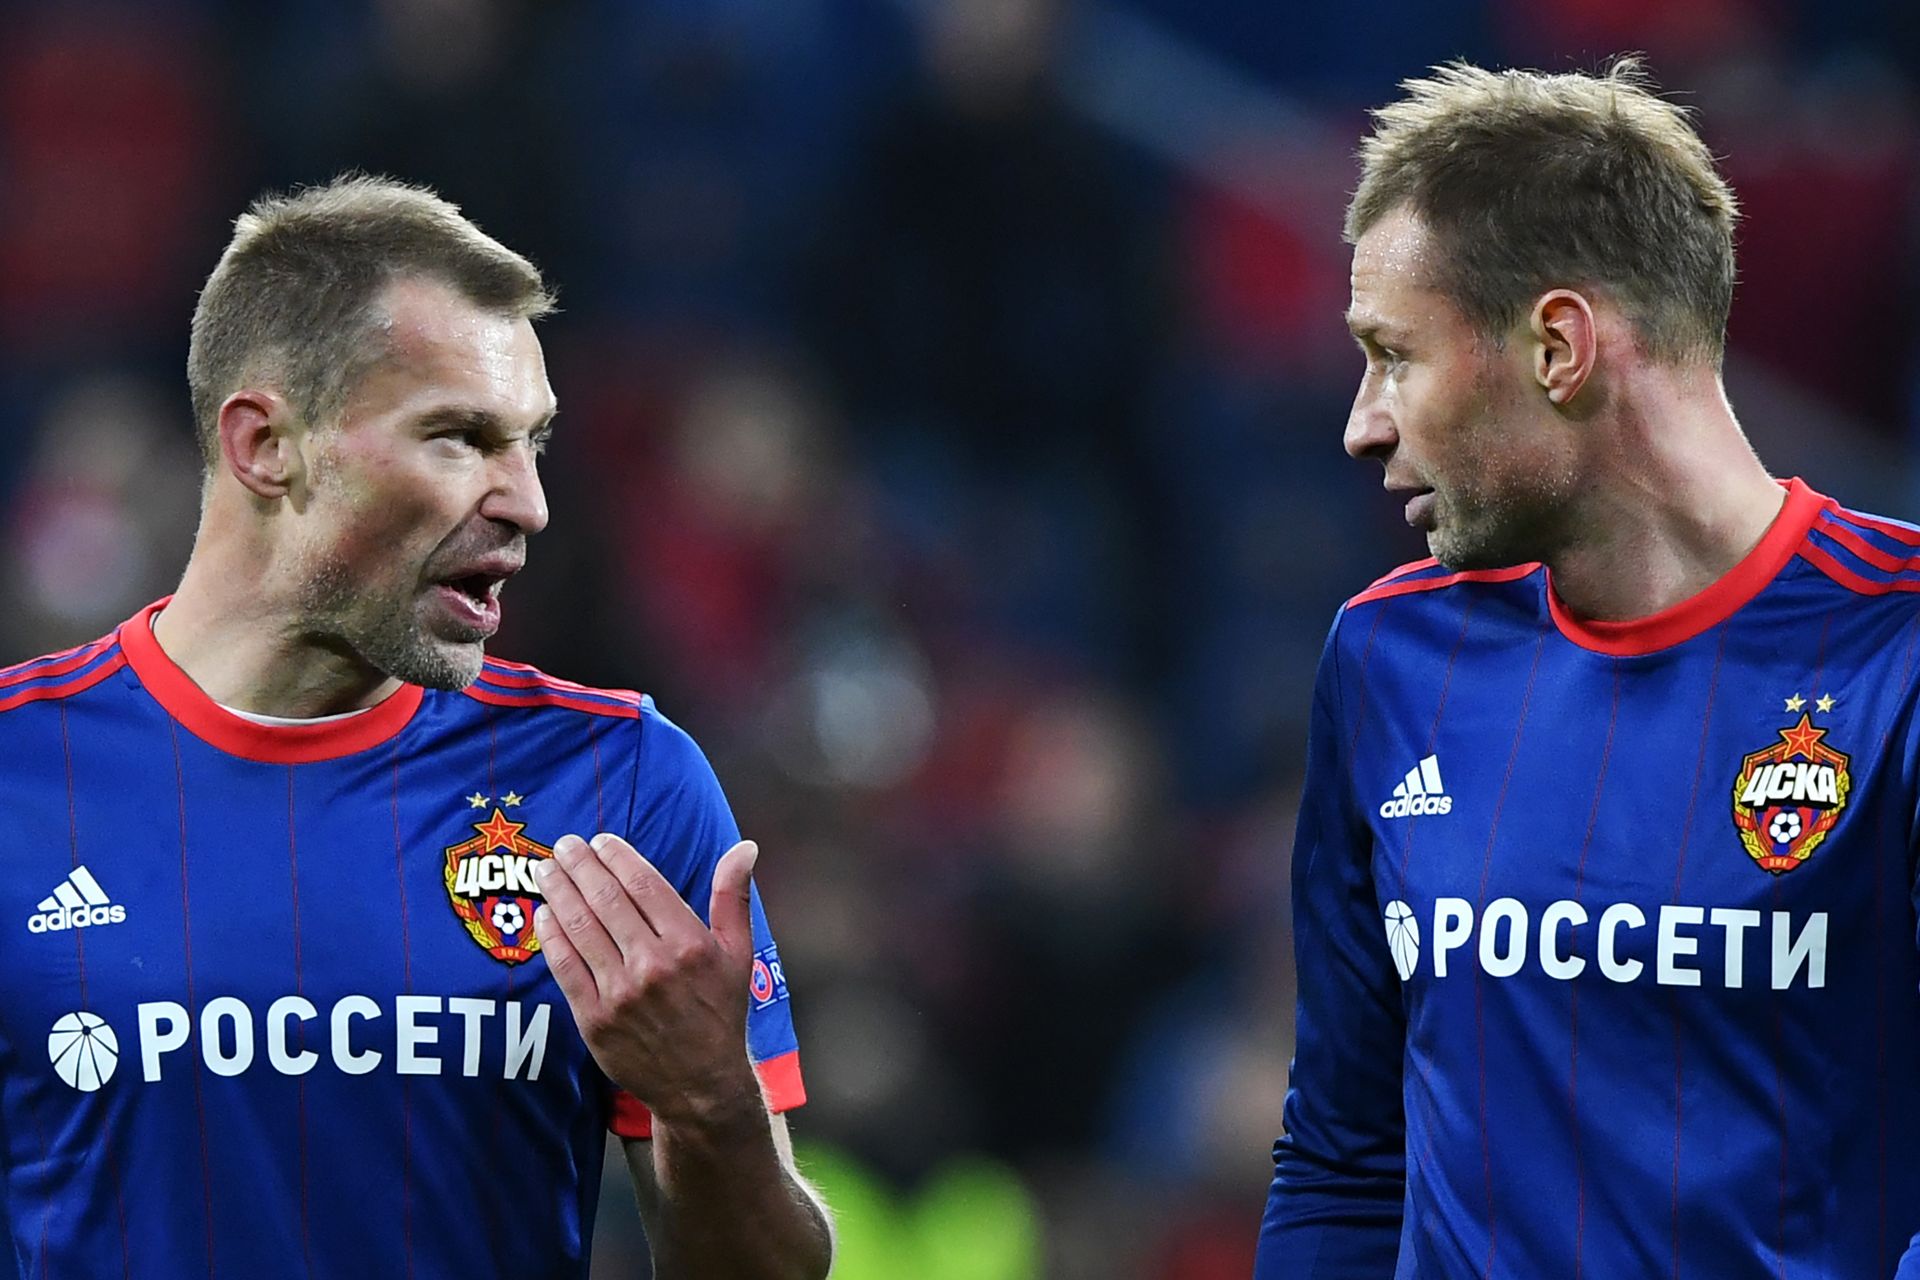 <p>                     Both central defenders who could operate as full-backs, Vasili and Aleksei Berezutski spent long careers with CSKA Moscow.                   </p>                                      <p>                     The twin brothers won over 150 caps between them for Russia between 2003 and 2016. After retiring in 2018, they worked together as assistant coaches.                   </p>